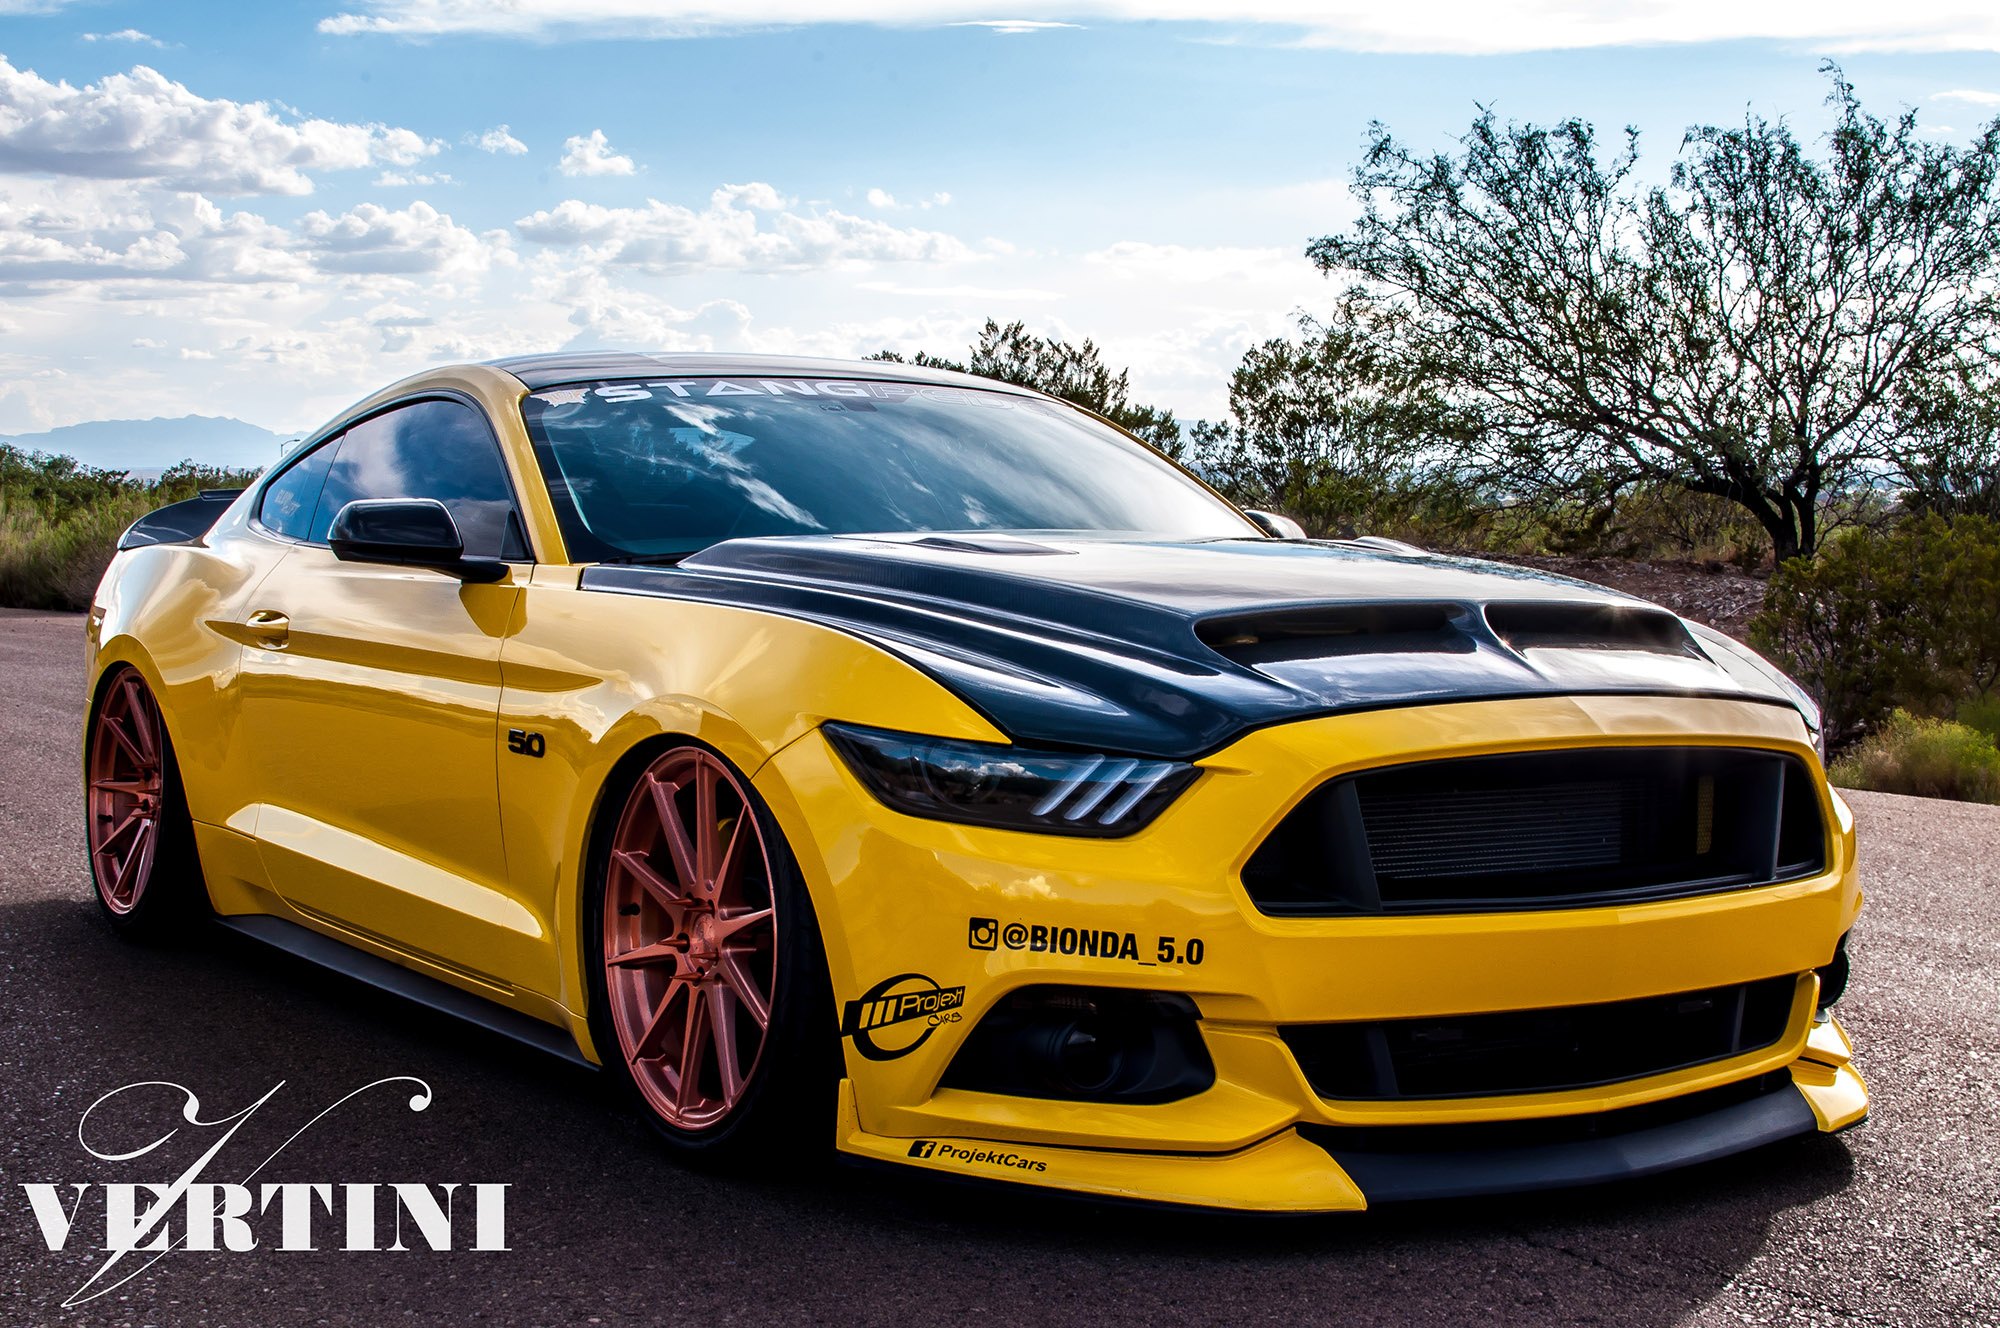 Custom Yellow Ford Mustang 5.0 with Black Accents - Photo by Vertini Wheels